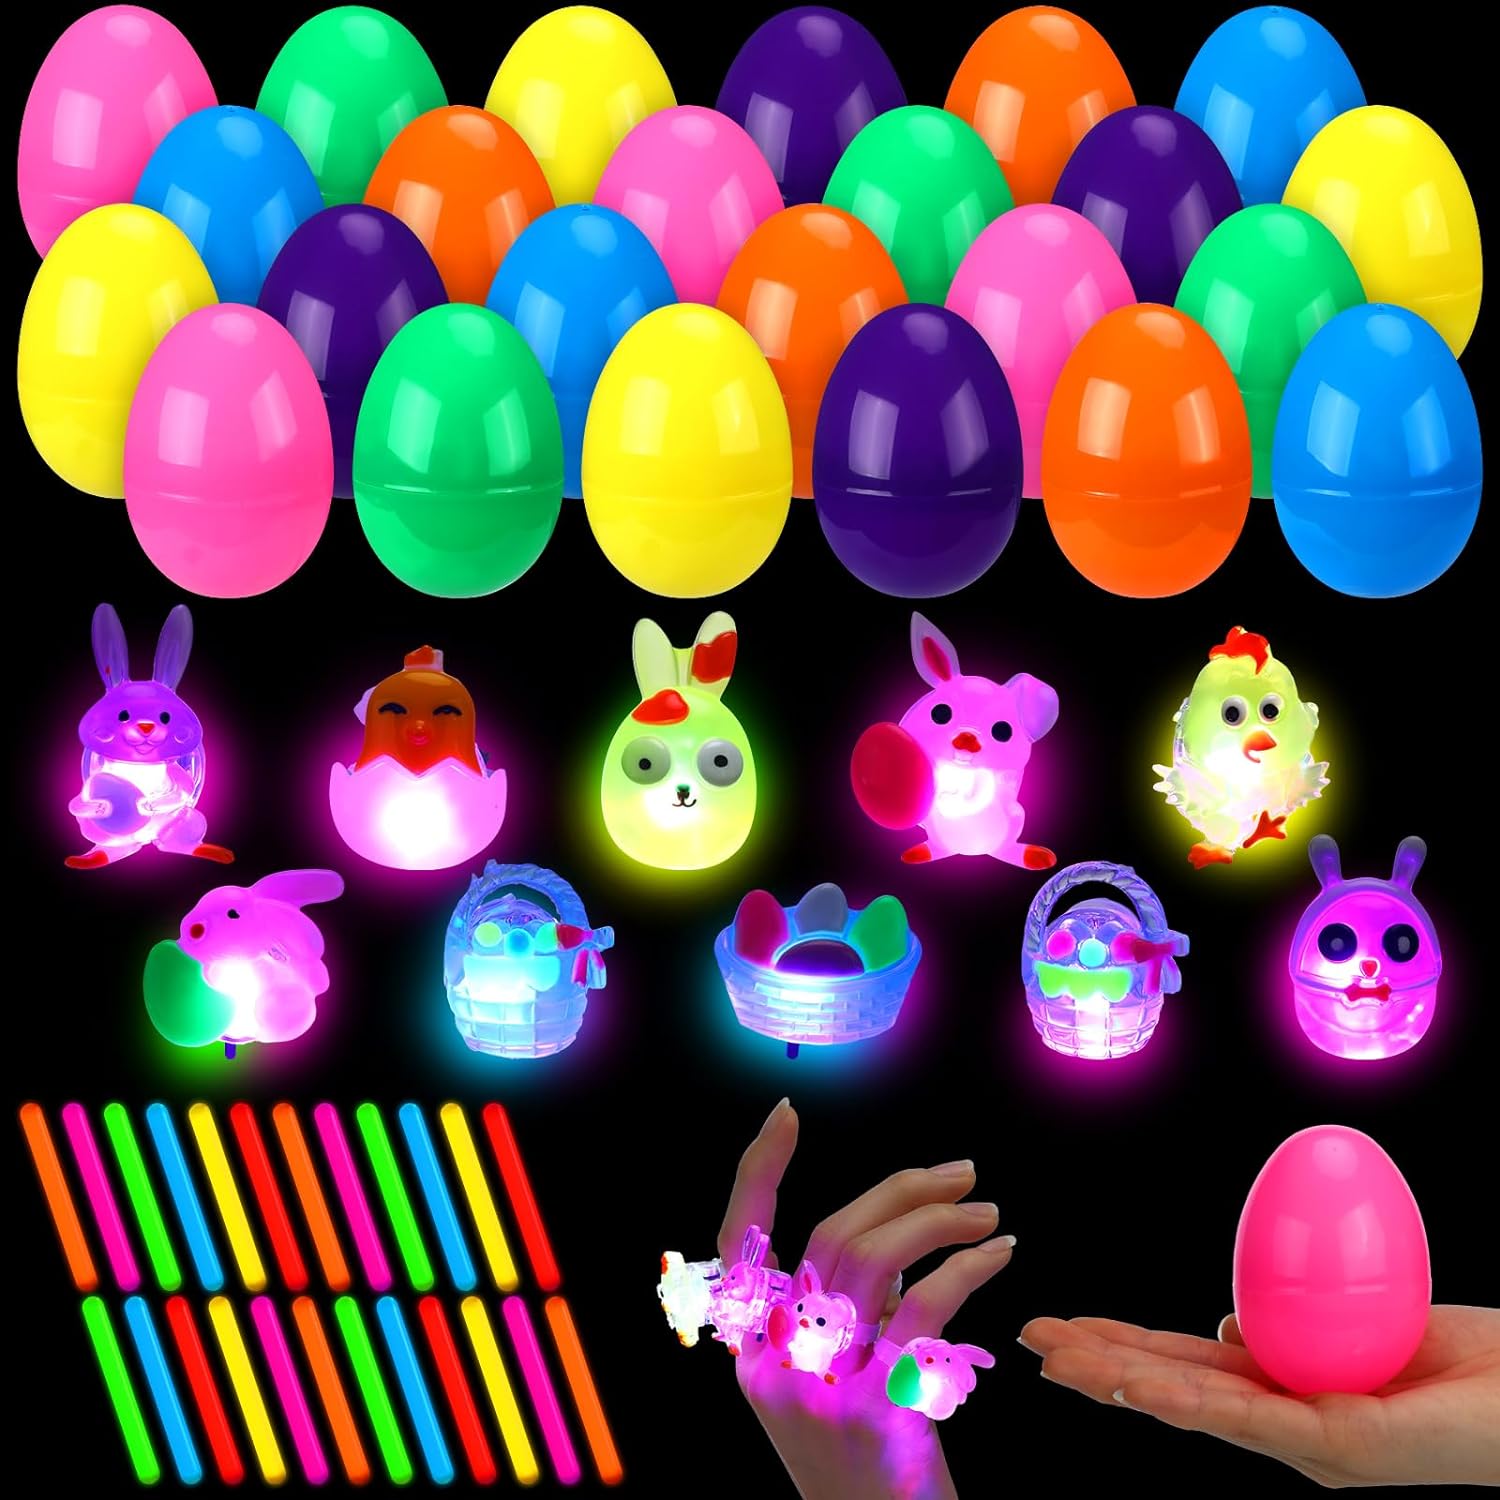 24 Set Glow in the Dark Easter Eggs Prefilled Easter Eggs Include 24 Easter Eggs 24 Mini Glow Sticks 24 Light up Rings Toys Easter Basket Stuffers Gifts for Kids Glow in the Dark Easter Hunt